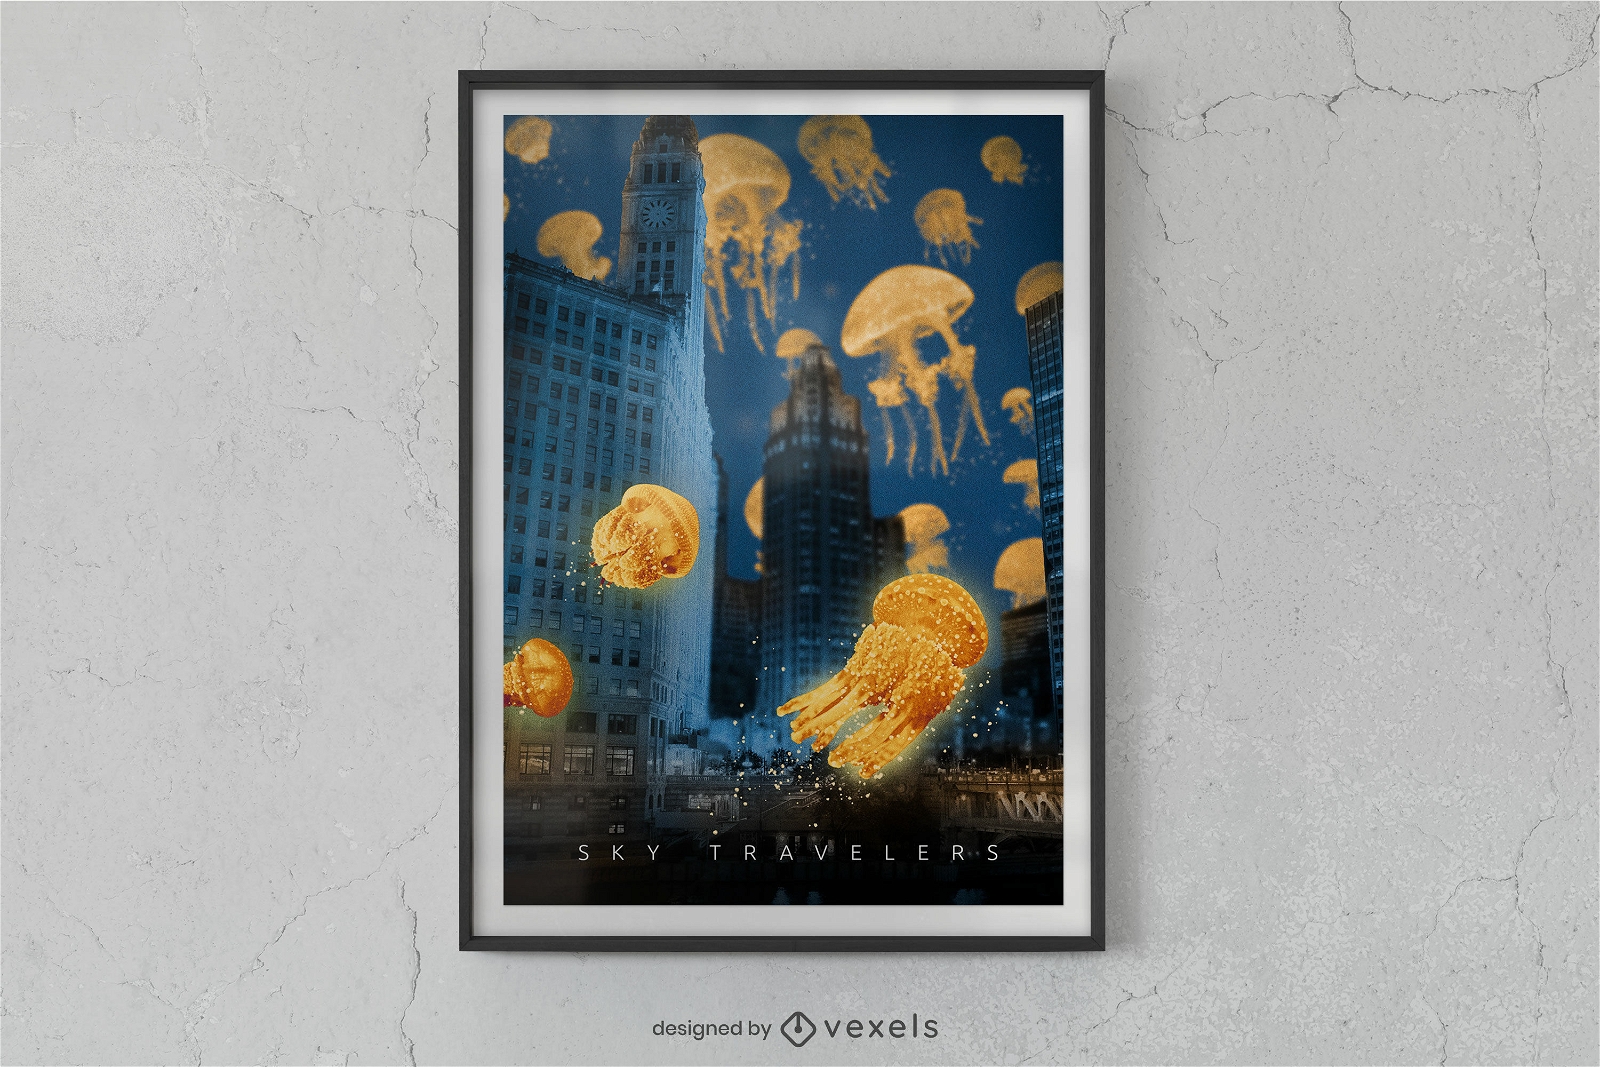 Jellyfish in a city poster design